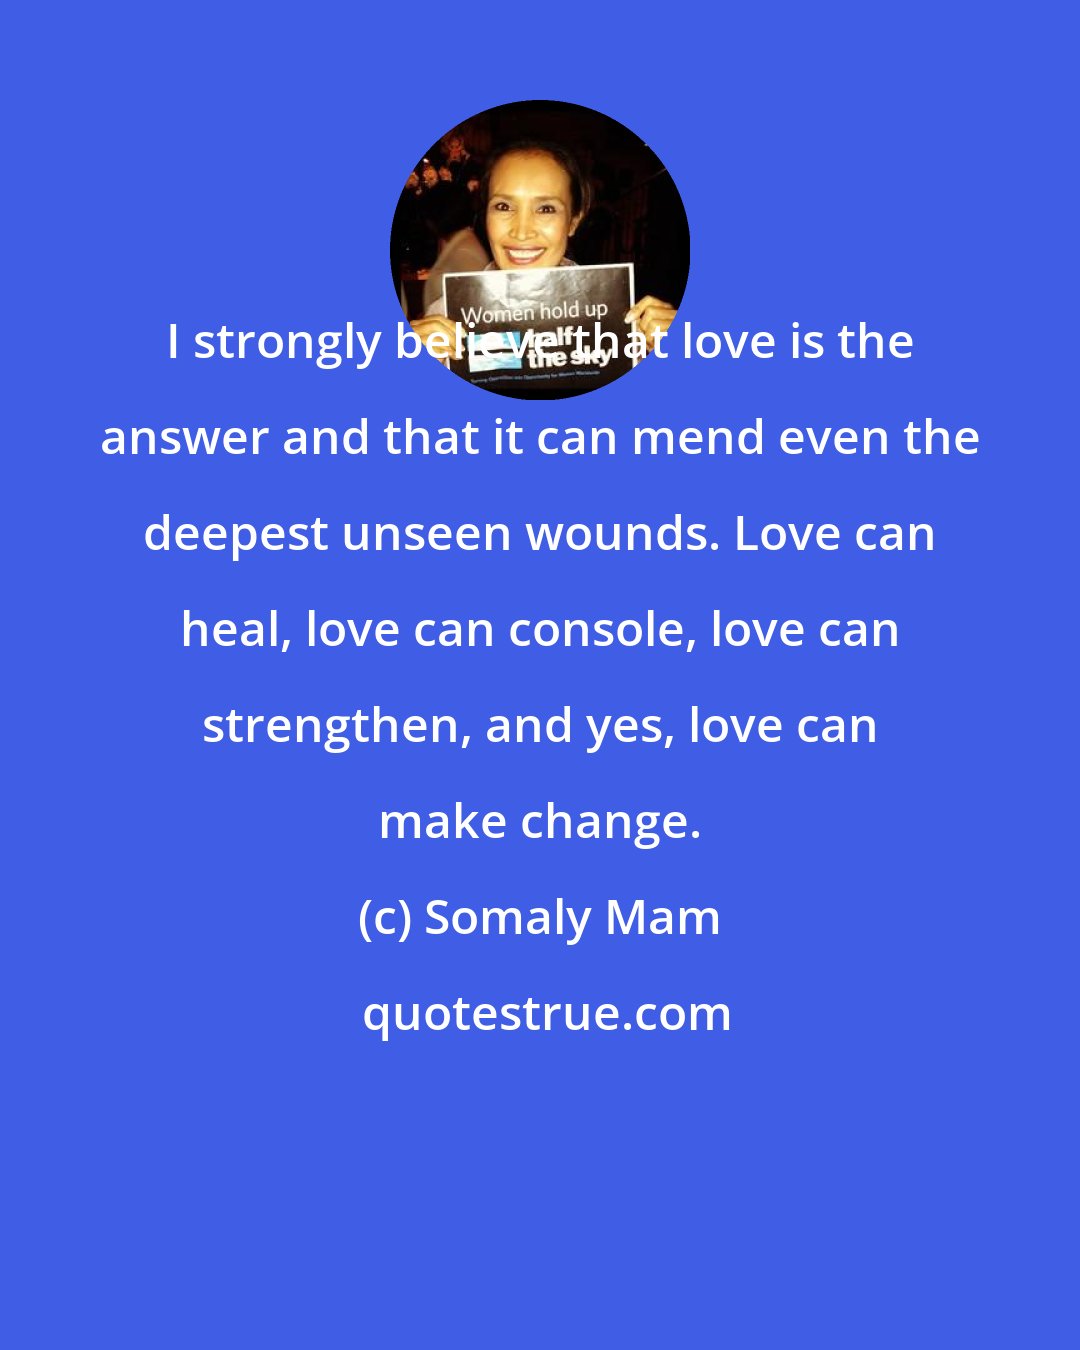 Somaly Mam: I strongly believe that love is the answer and that it can mend even the deepest unseen wounds. Love can heal, love can console, love can strengthen, and yes, love can make change.